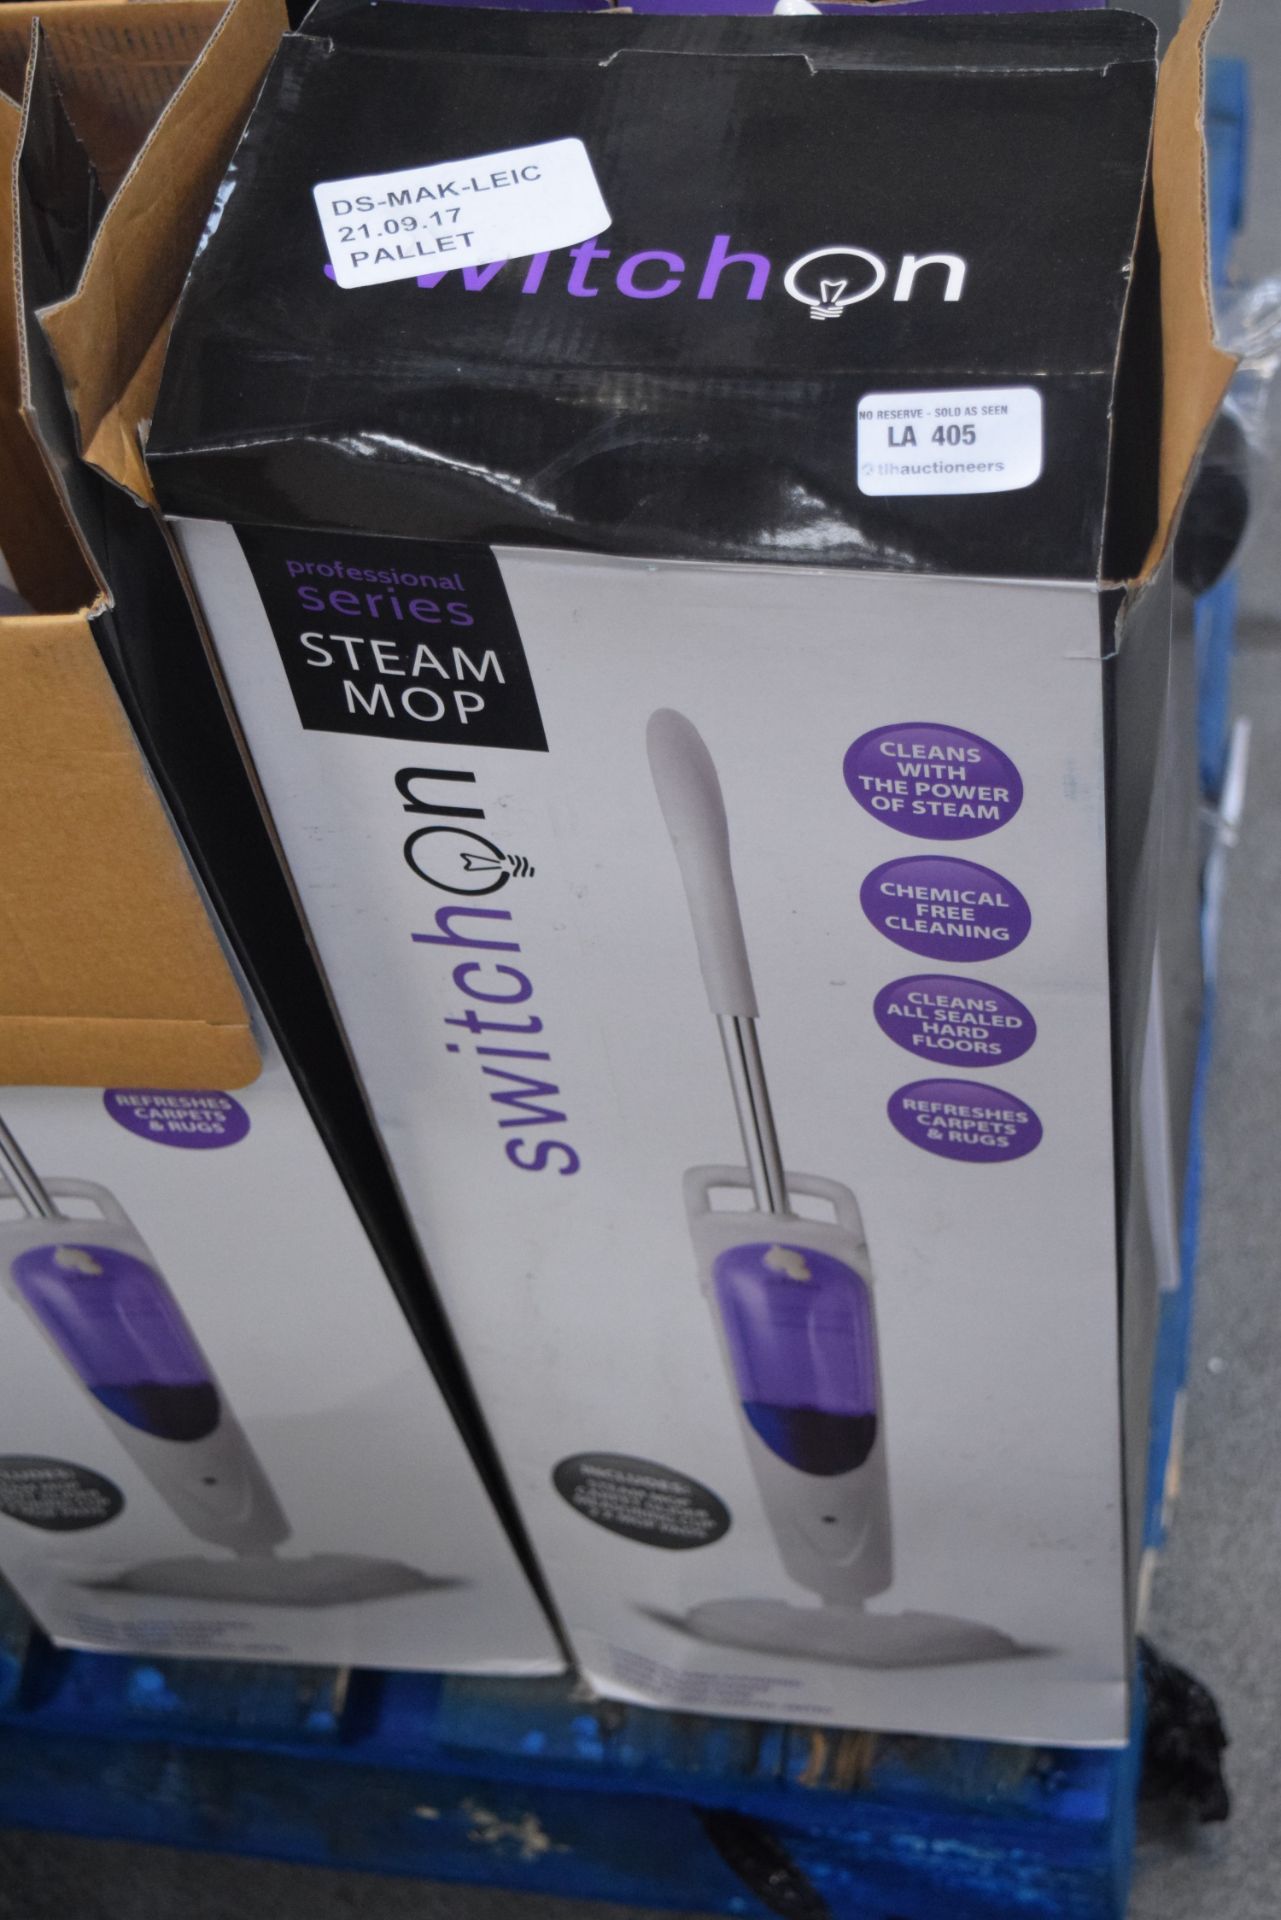 1 x BOXED SWITCH ON STEAM FLOOR CLEANER RRP £205 21.09.17 *PLEASE NOTE THAT THE BID PRICE IS